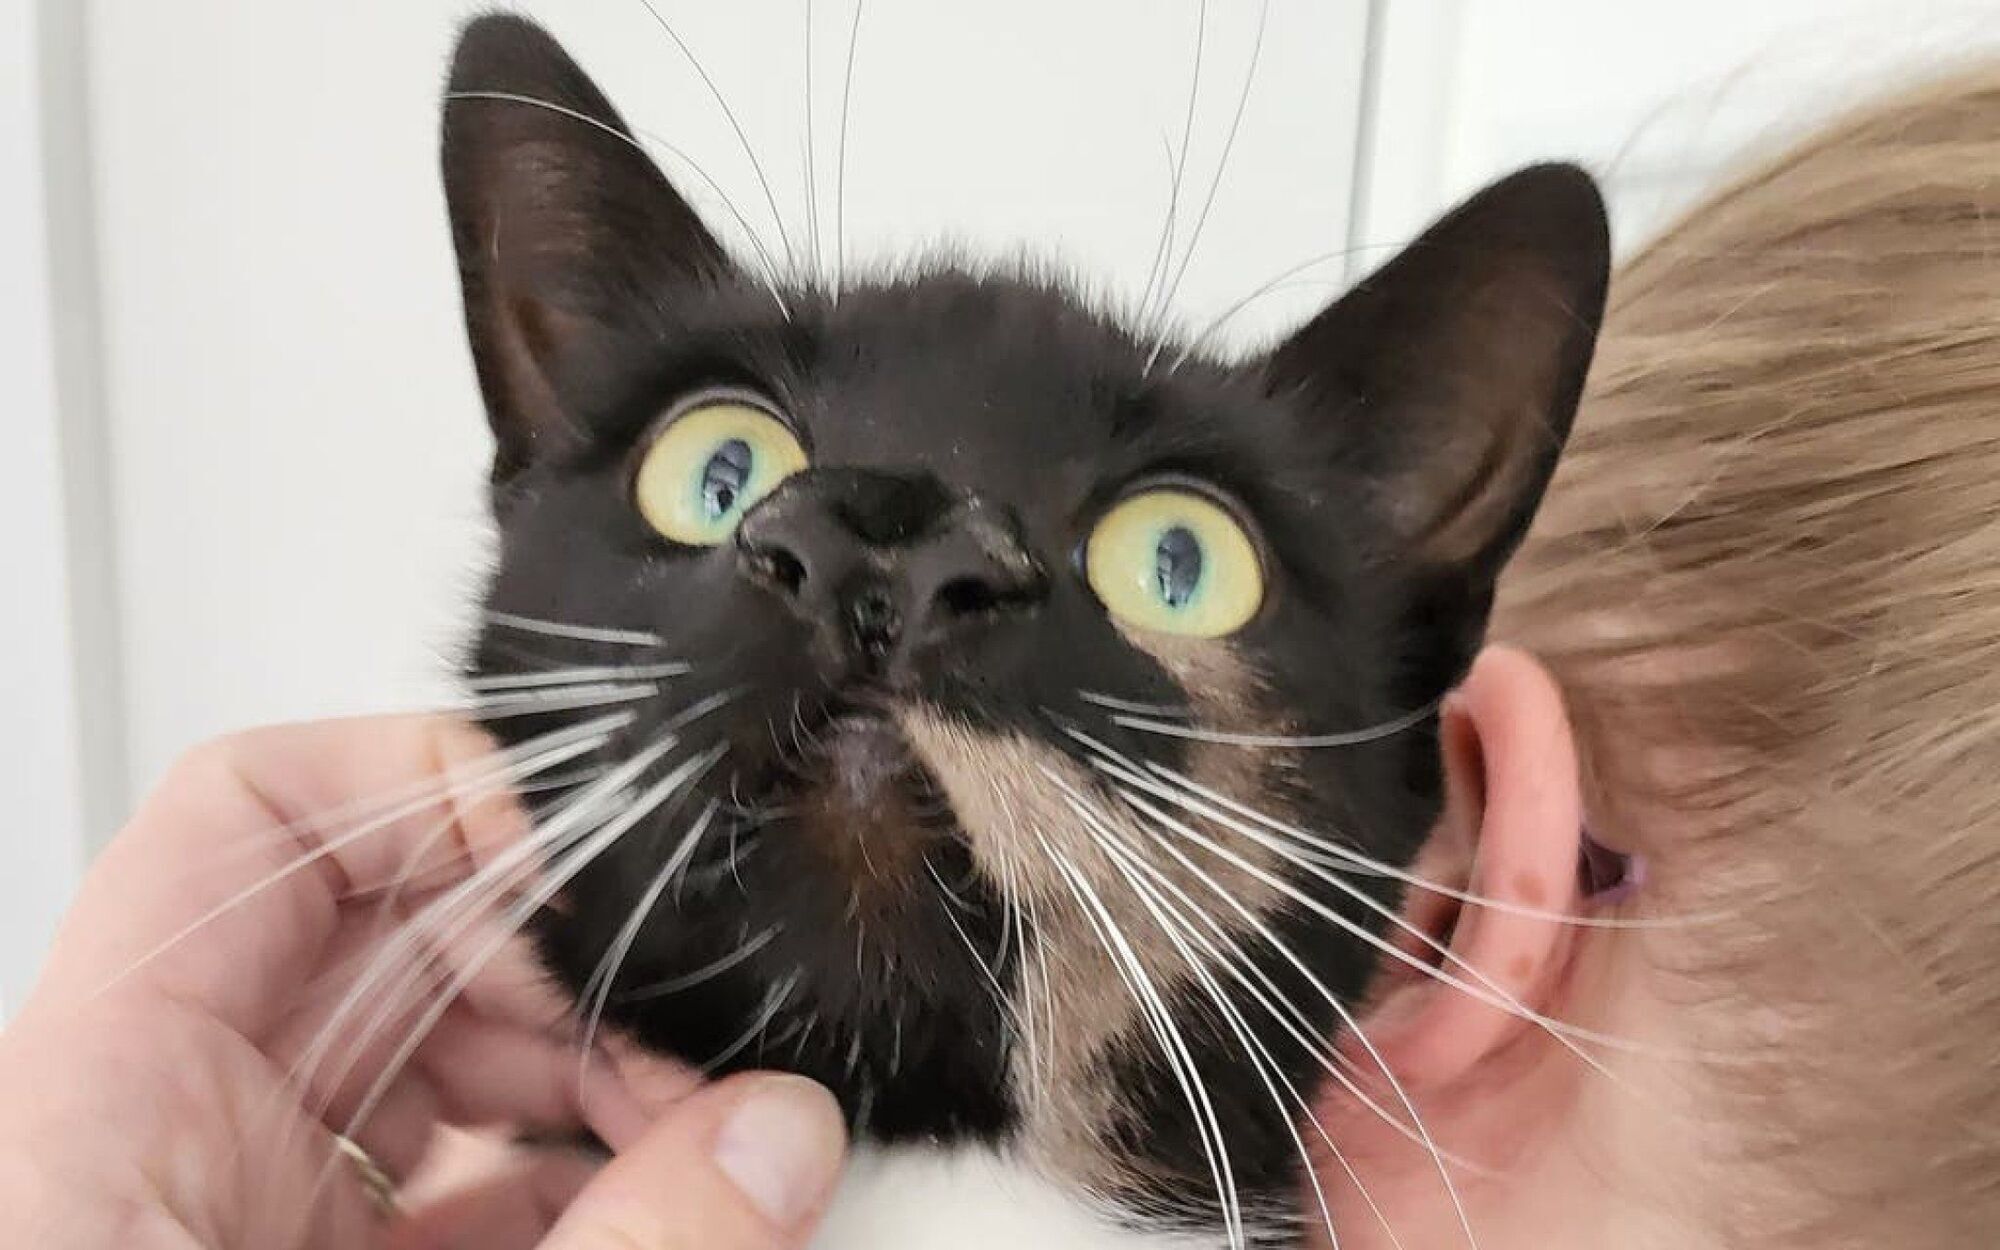 Cat with two  noses was  found in Britain (photo)